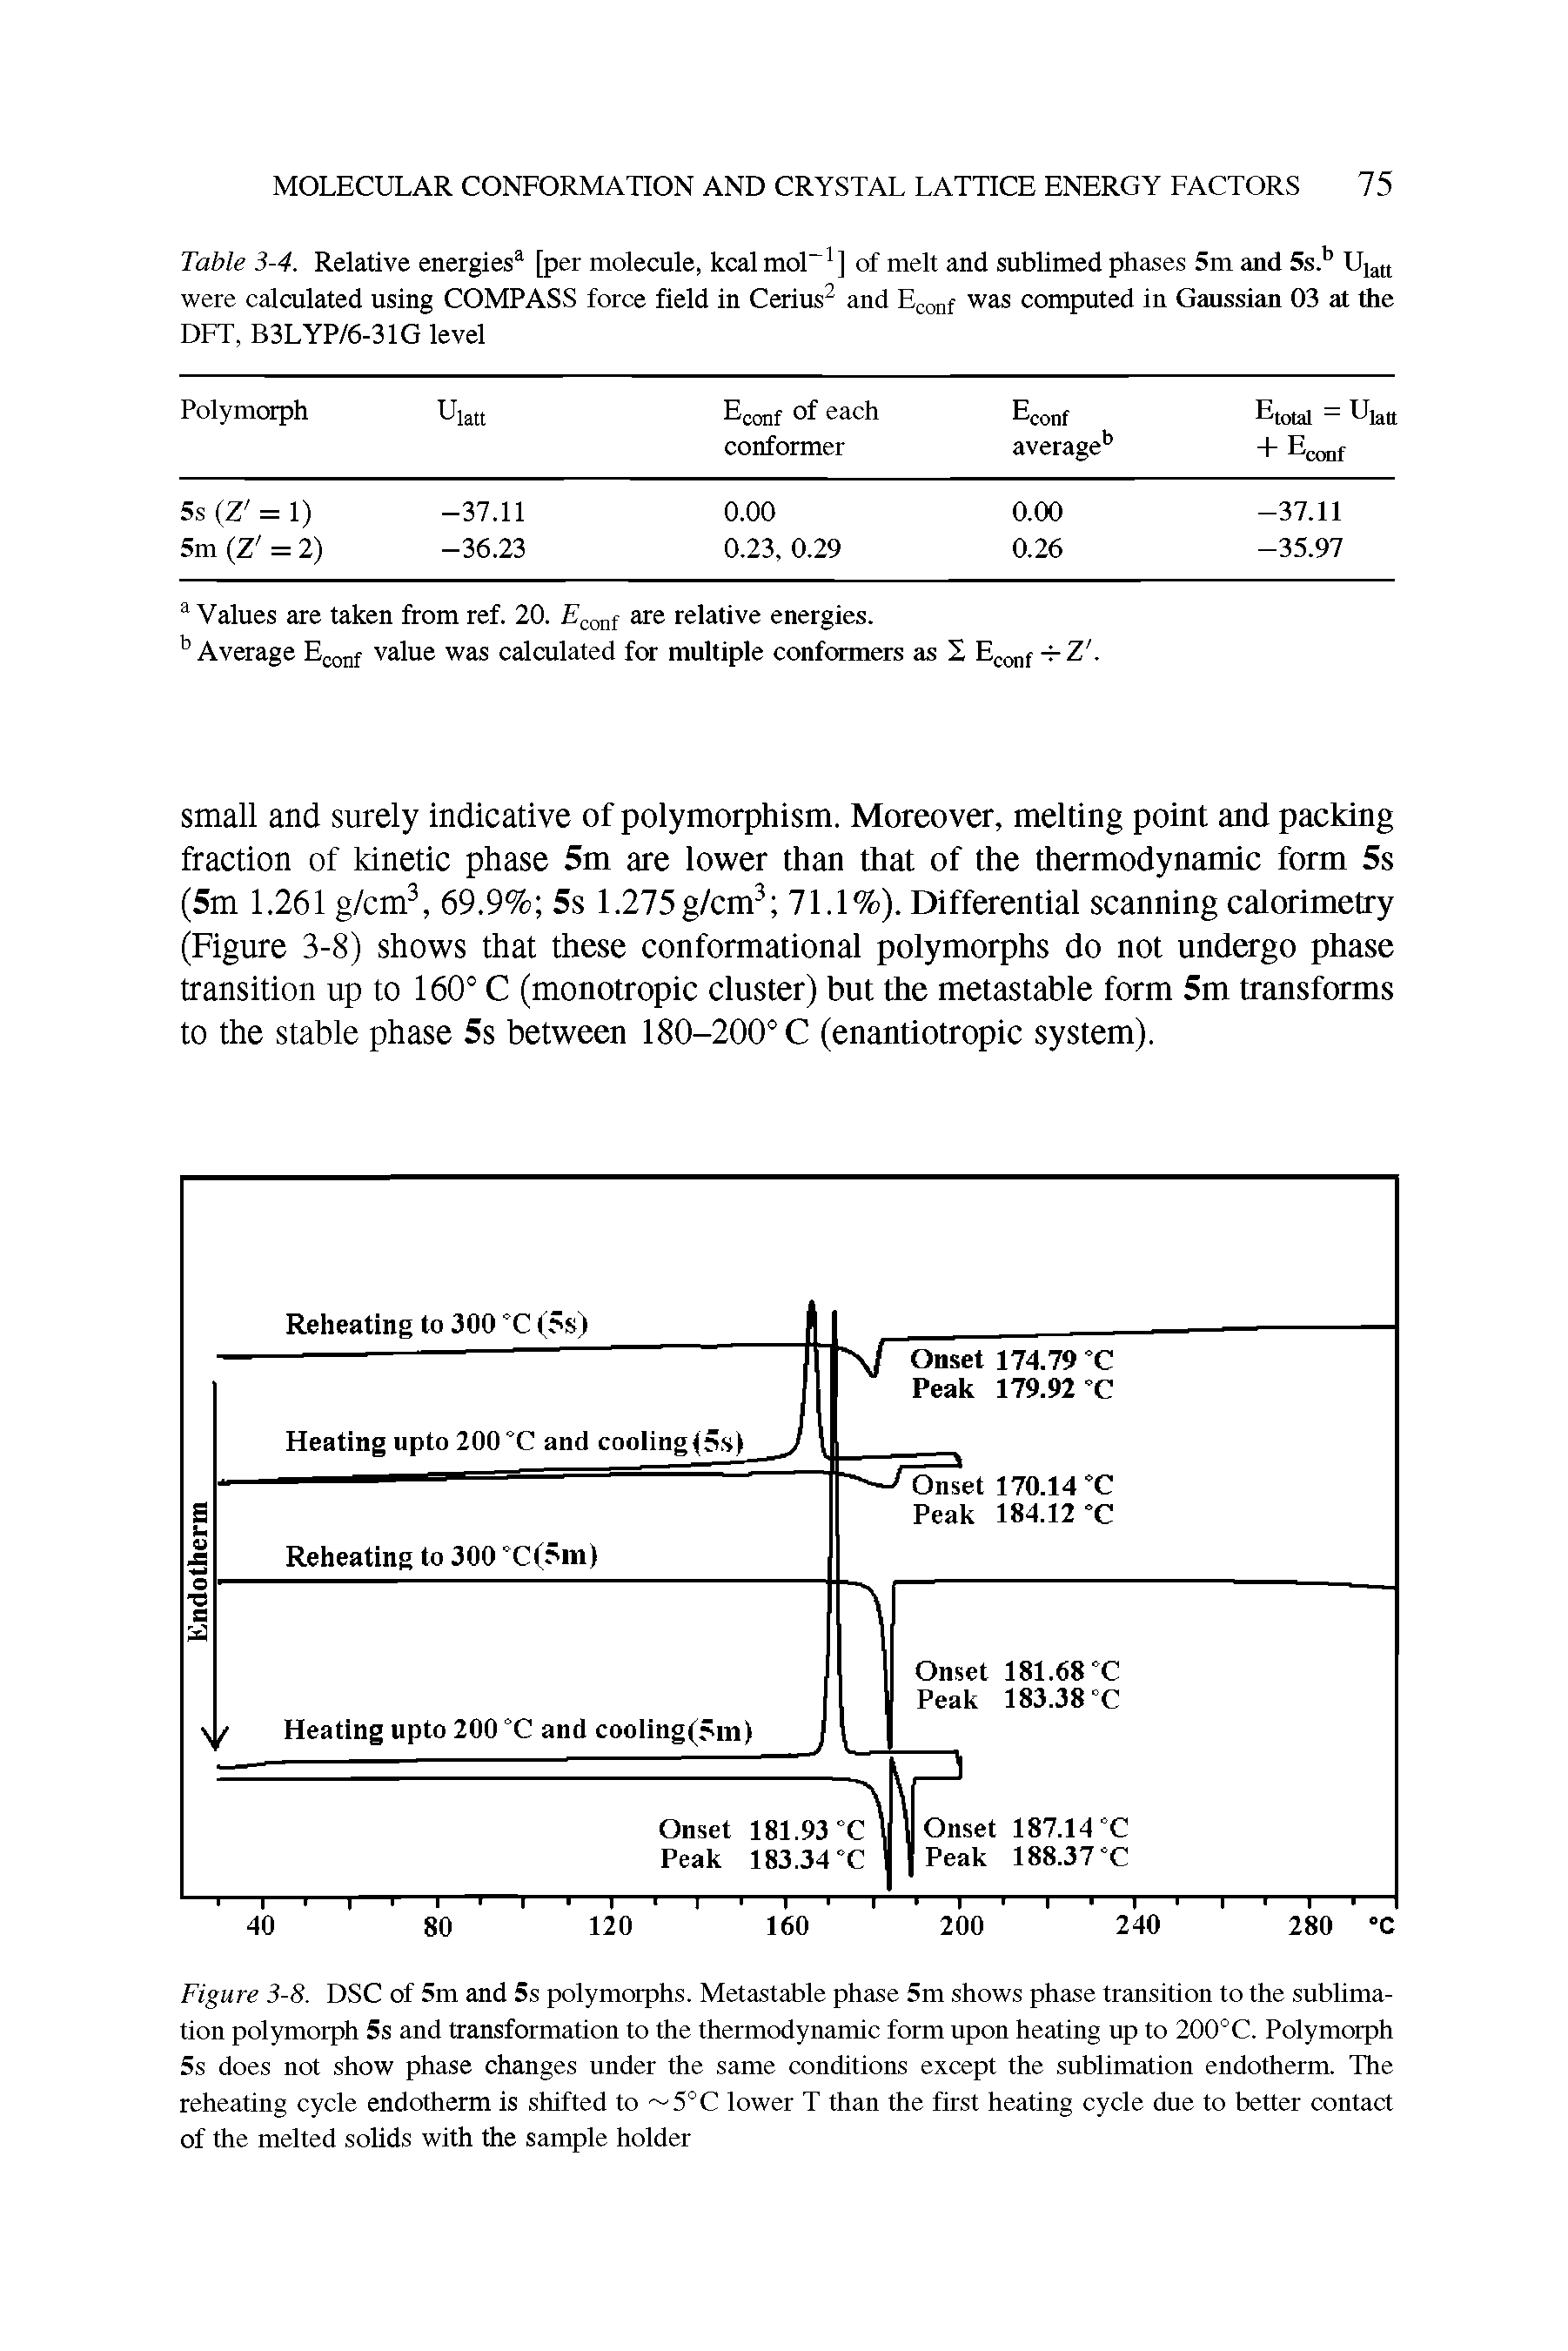 Table 3-4. Relative energies [per molecule, kcal mol ] of melt and sublimed phases 5m and 5s. Ujj(( were calculated using COMPASS force field in Cerius and E onf was computed in Gaussian 03 at the DFT, B3LYP/6-3IG level...